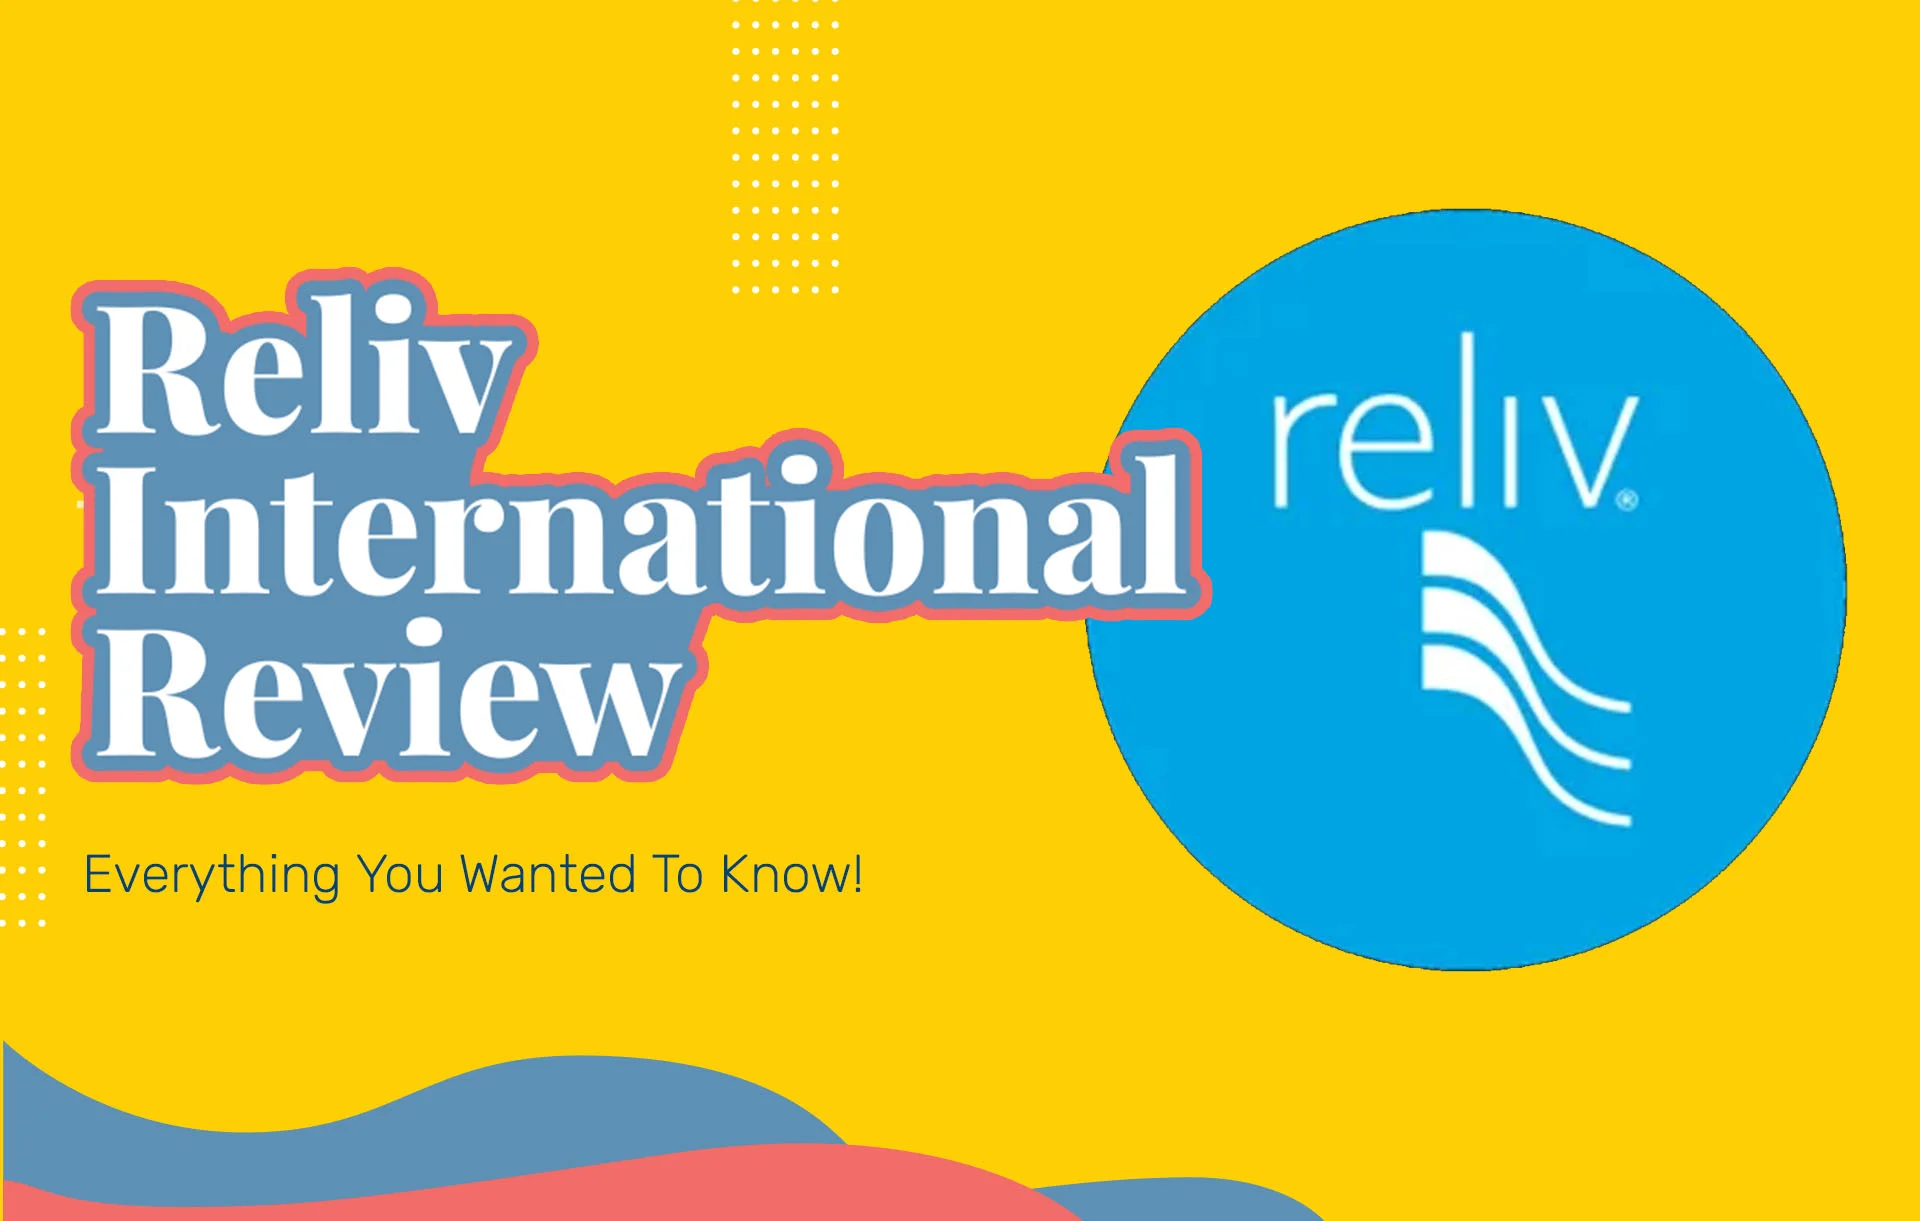 Reliv International Reviews: Everything You Wanted To Know!